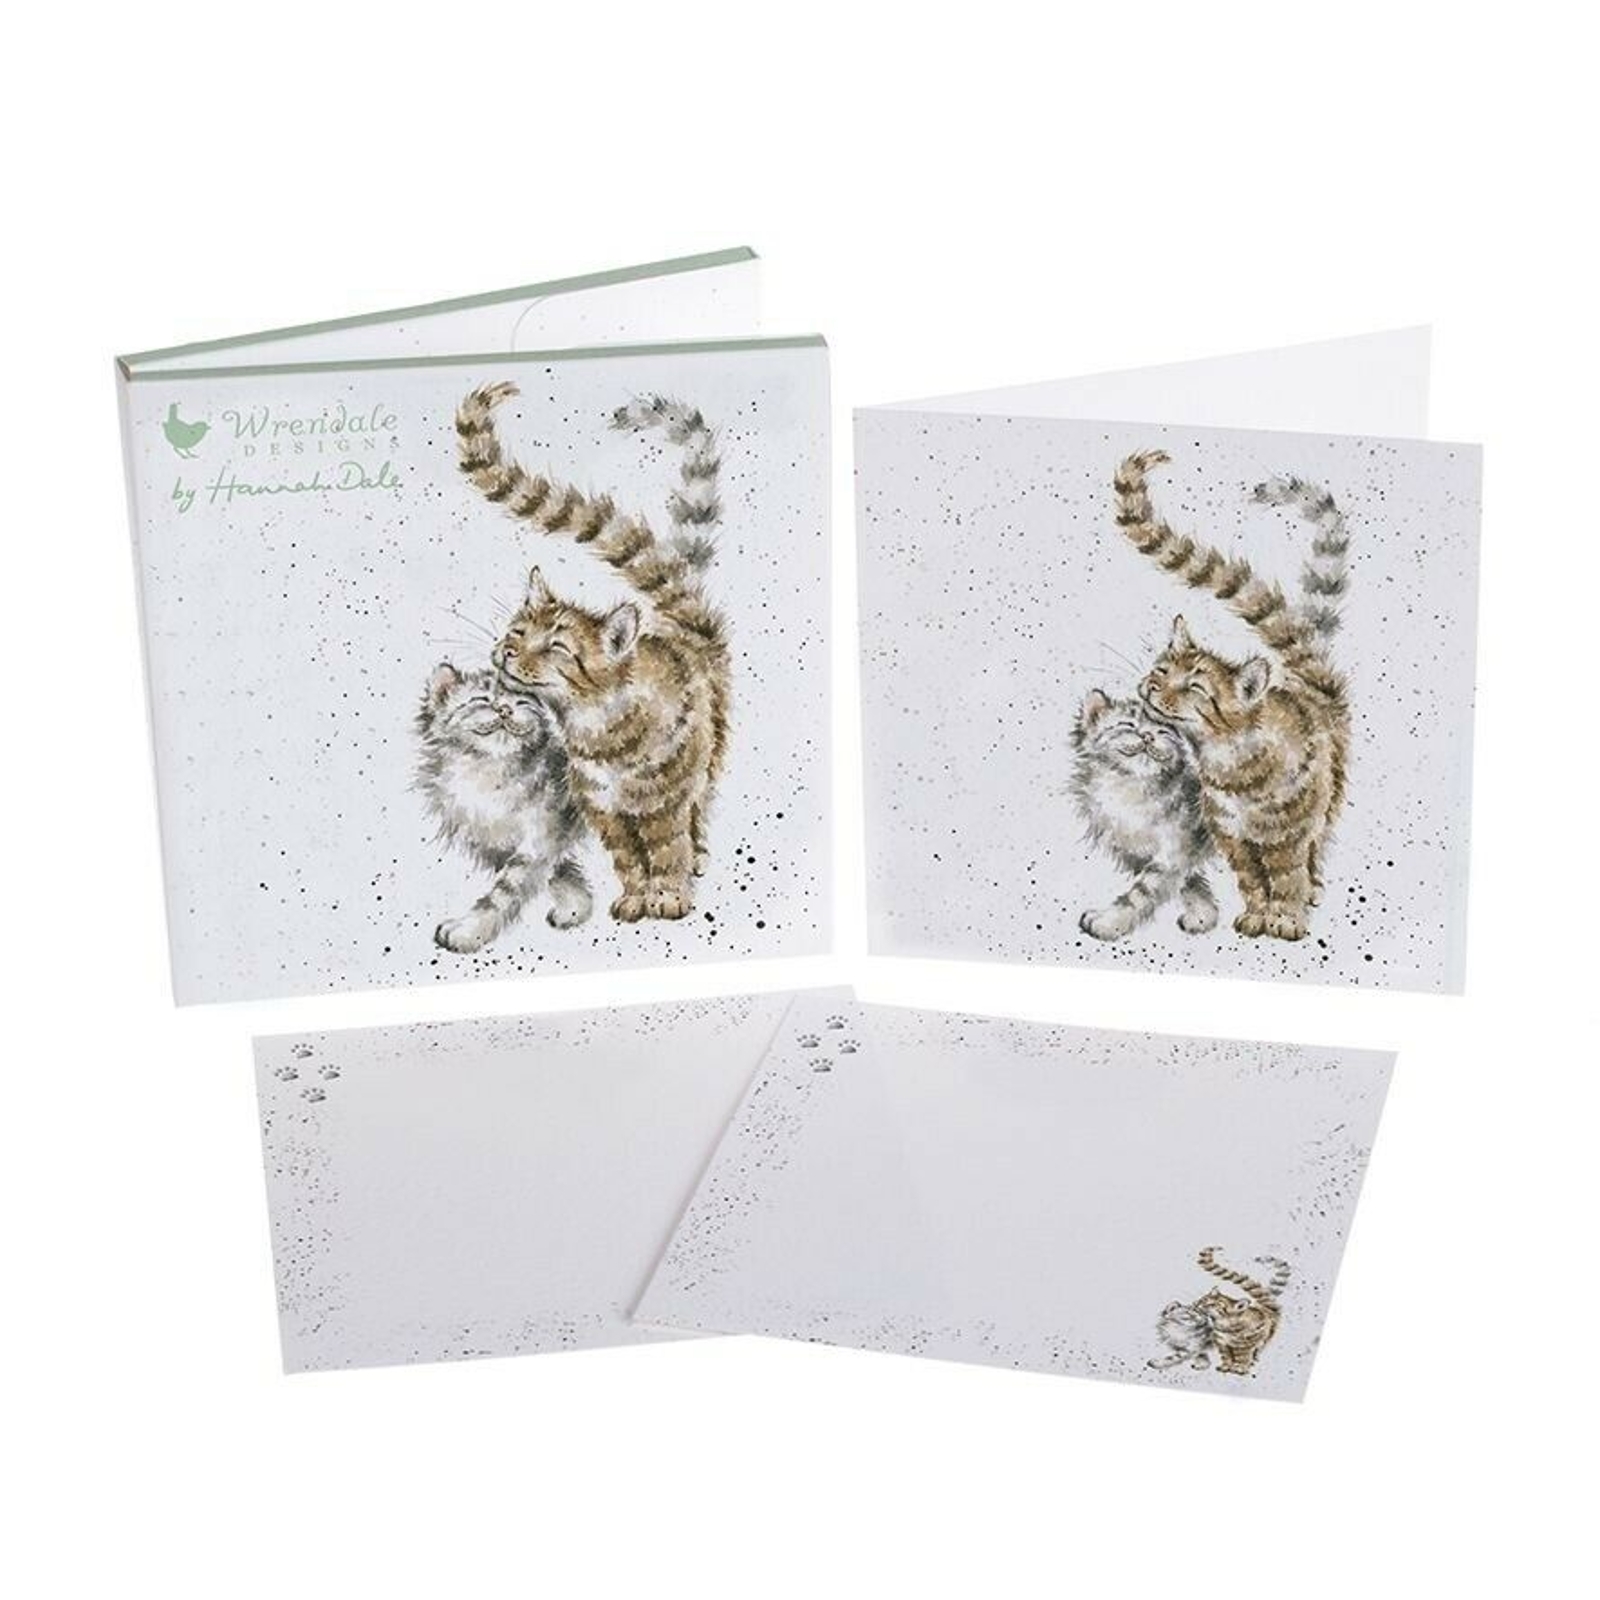 Wrendale Designs Flight of The Bumblebee Note Card Pack